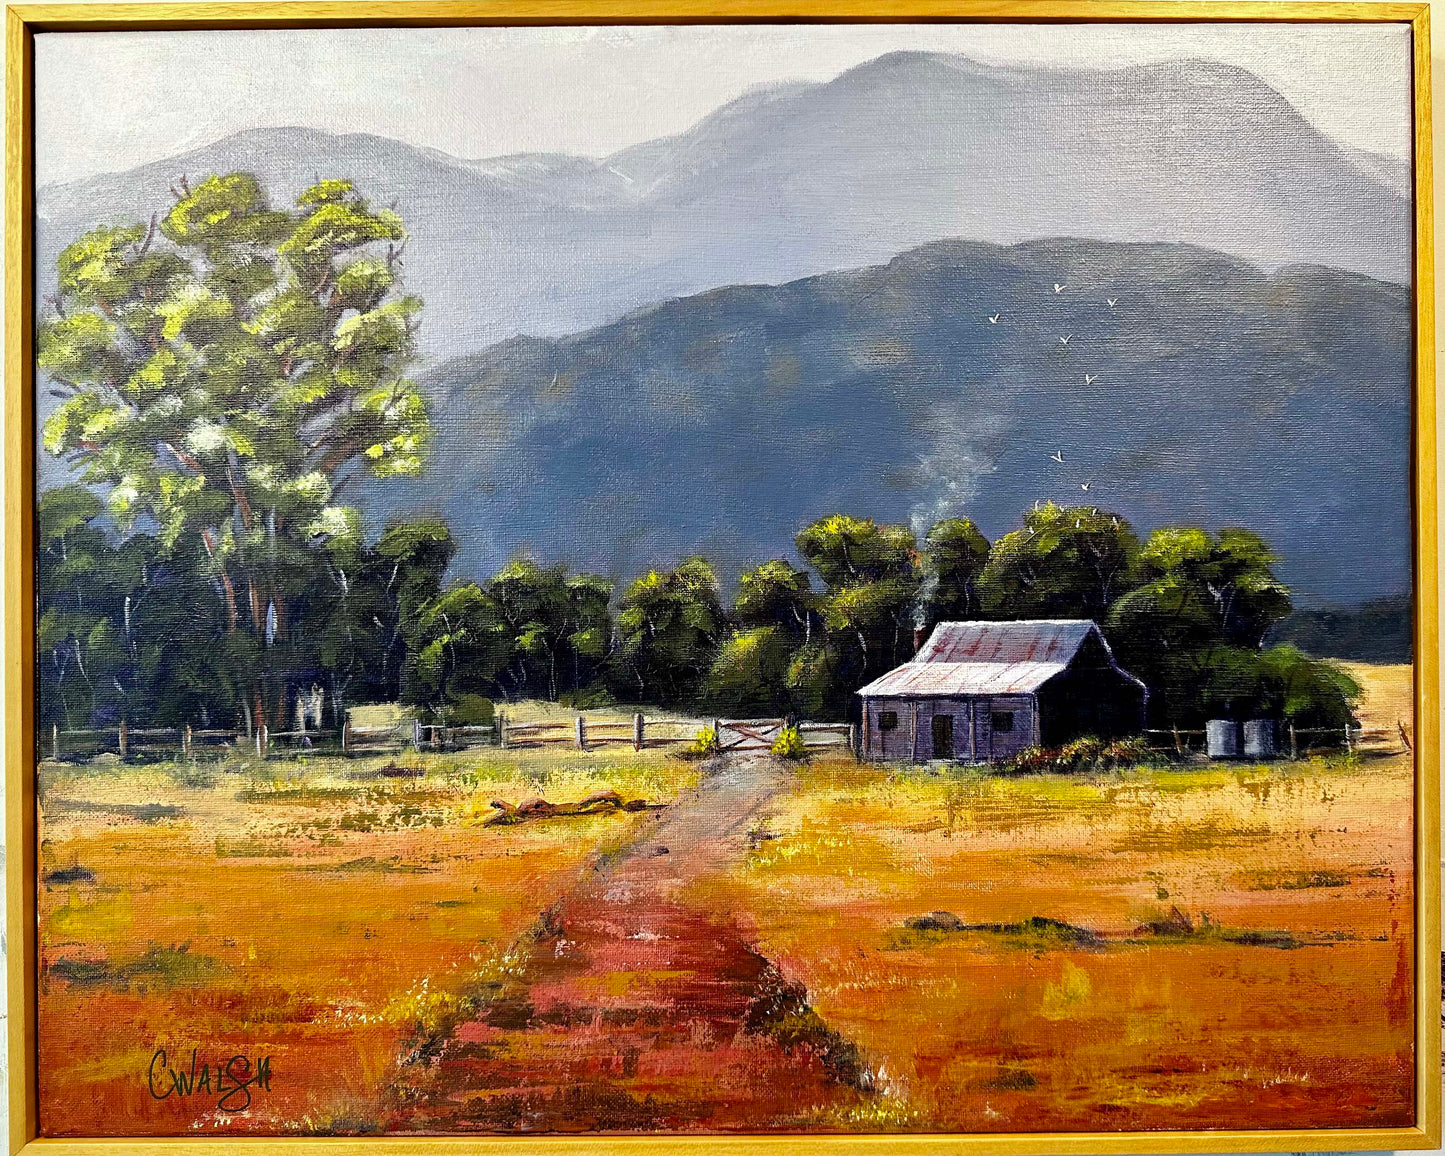 Private Commission: "Homestead Hideaway" Acrylic on Canvas - 40cm x 50cm (framed)